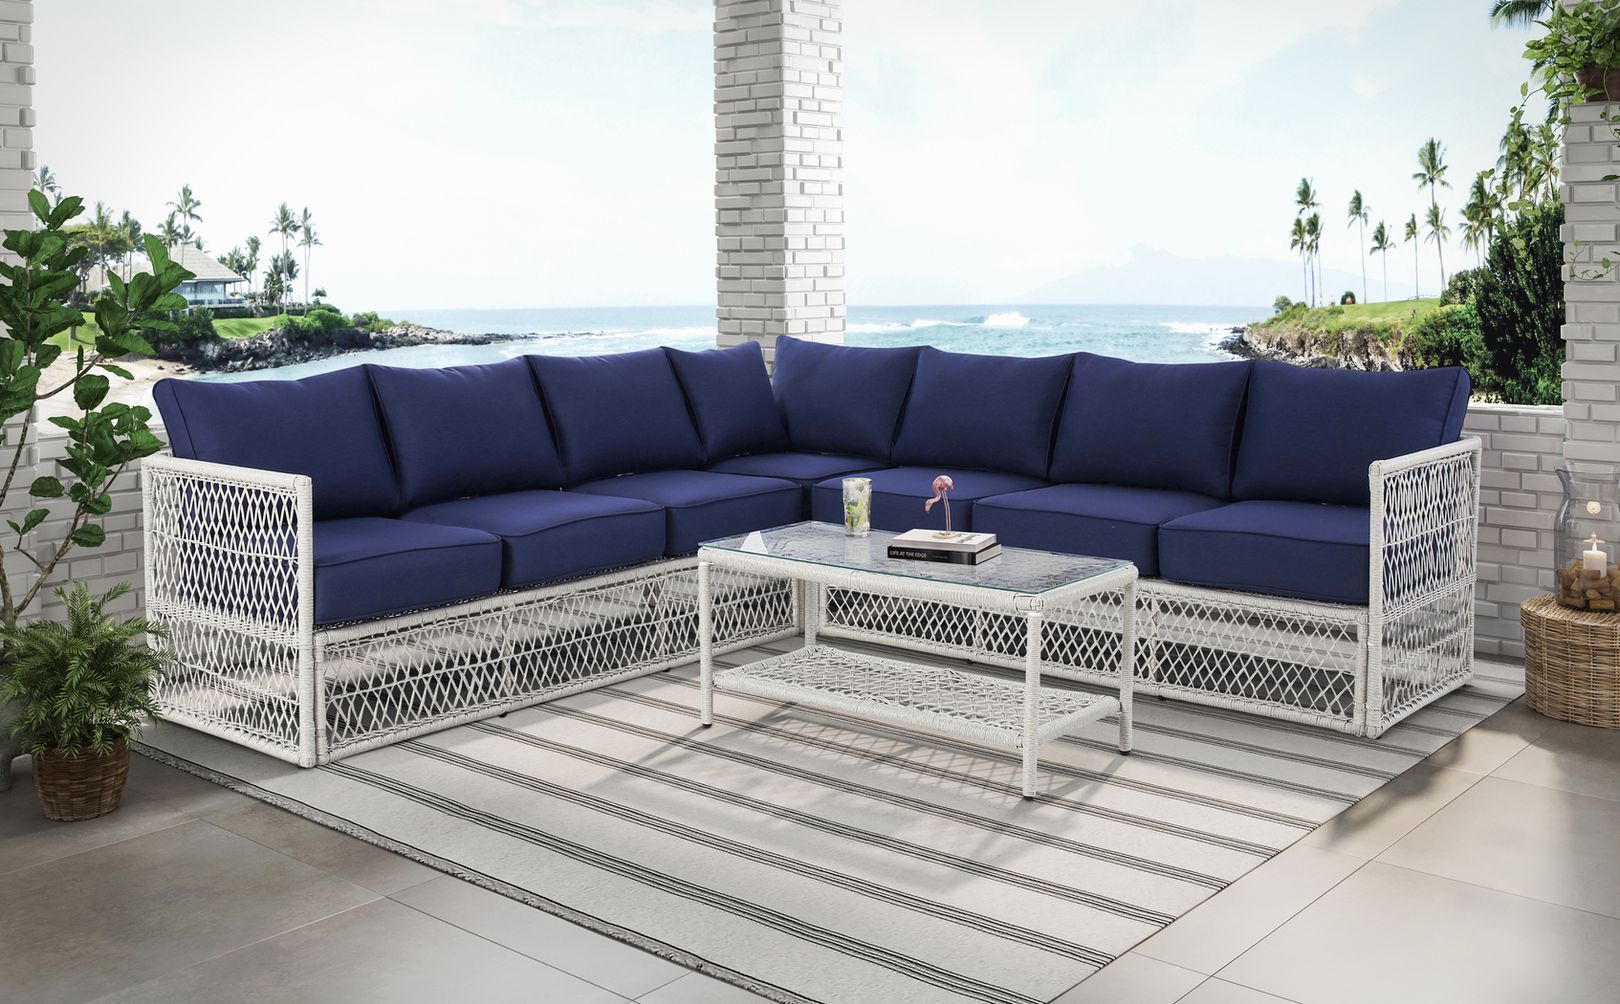 photo of modular white wicker sectional with blue cushions